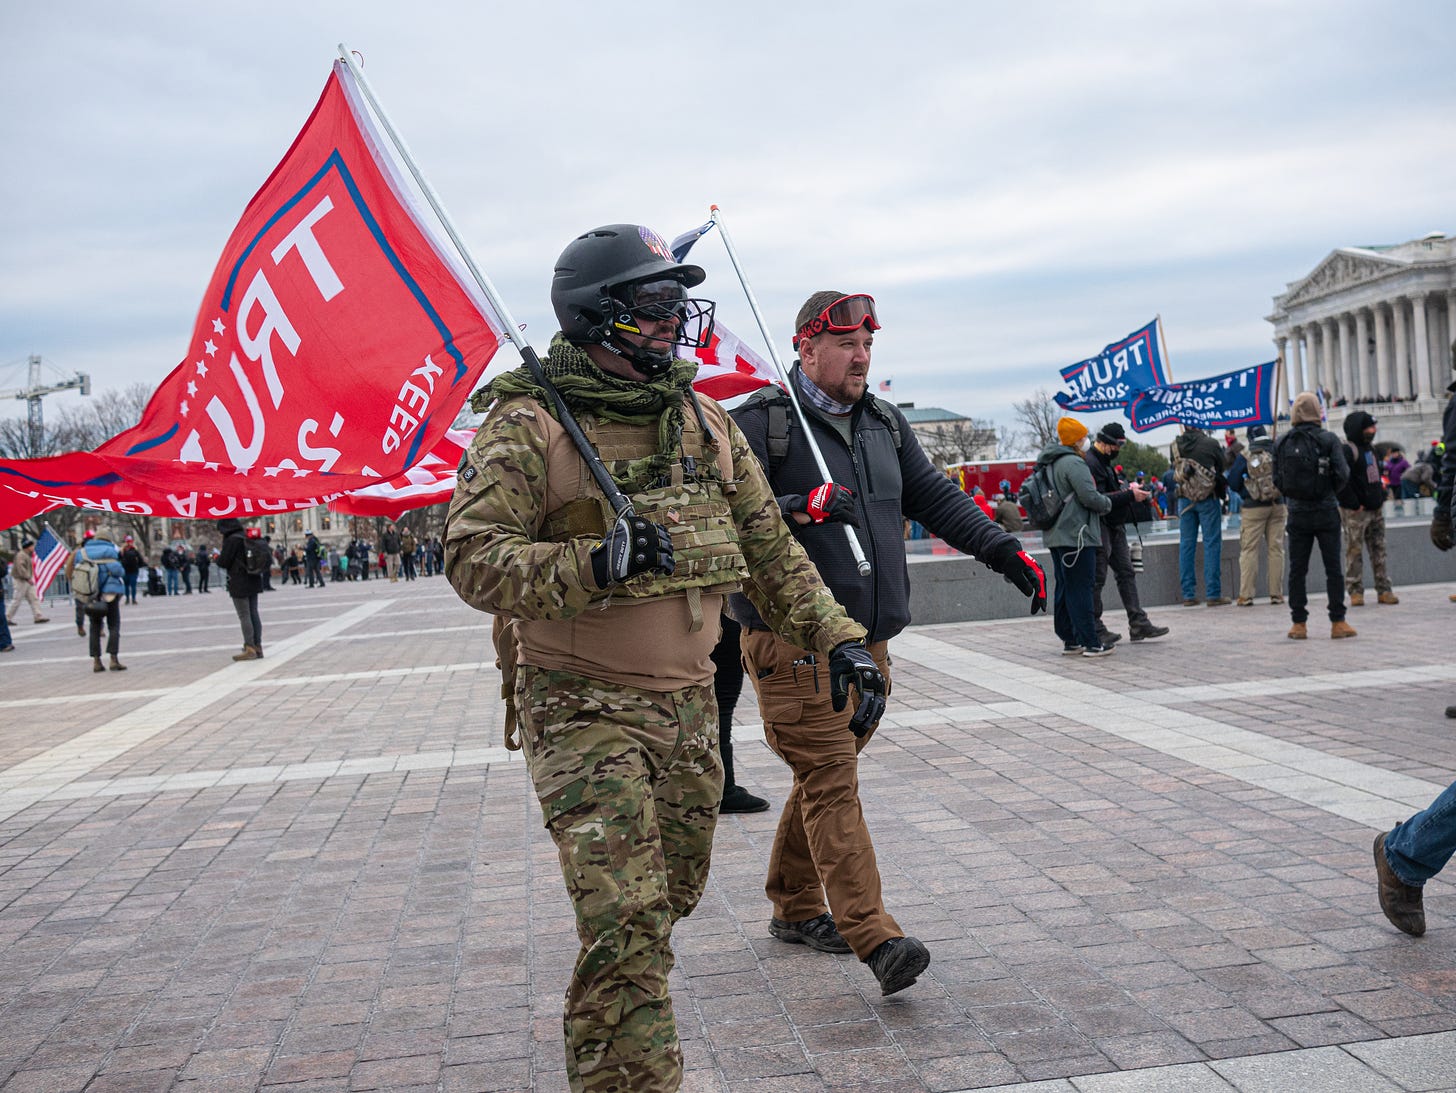 A pair of men stride with purpose on the mall in front of the US Capitol, Jan 6, 2021. One is wearing military fatigues, gloves, and what appears to be a black lacross helmet (with dark-tinted eye shield and black wire mouthguard). Over his right shoulder he is carrying a red Trump flag on a short pole. Alongside him, and in lockstep is another man in civilian clothes with a US flag on a short pole over his right shoulder. A pair or red ski-style goggles rests on his forehead. In the background, others mill about.